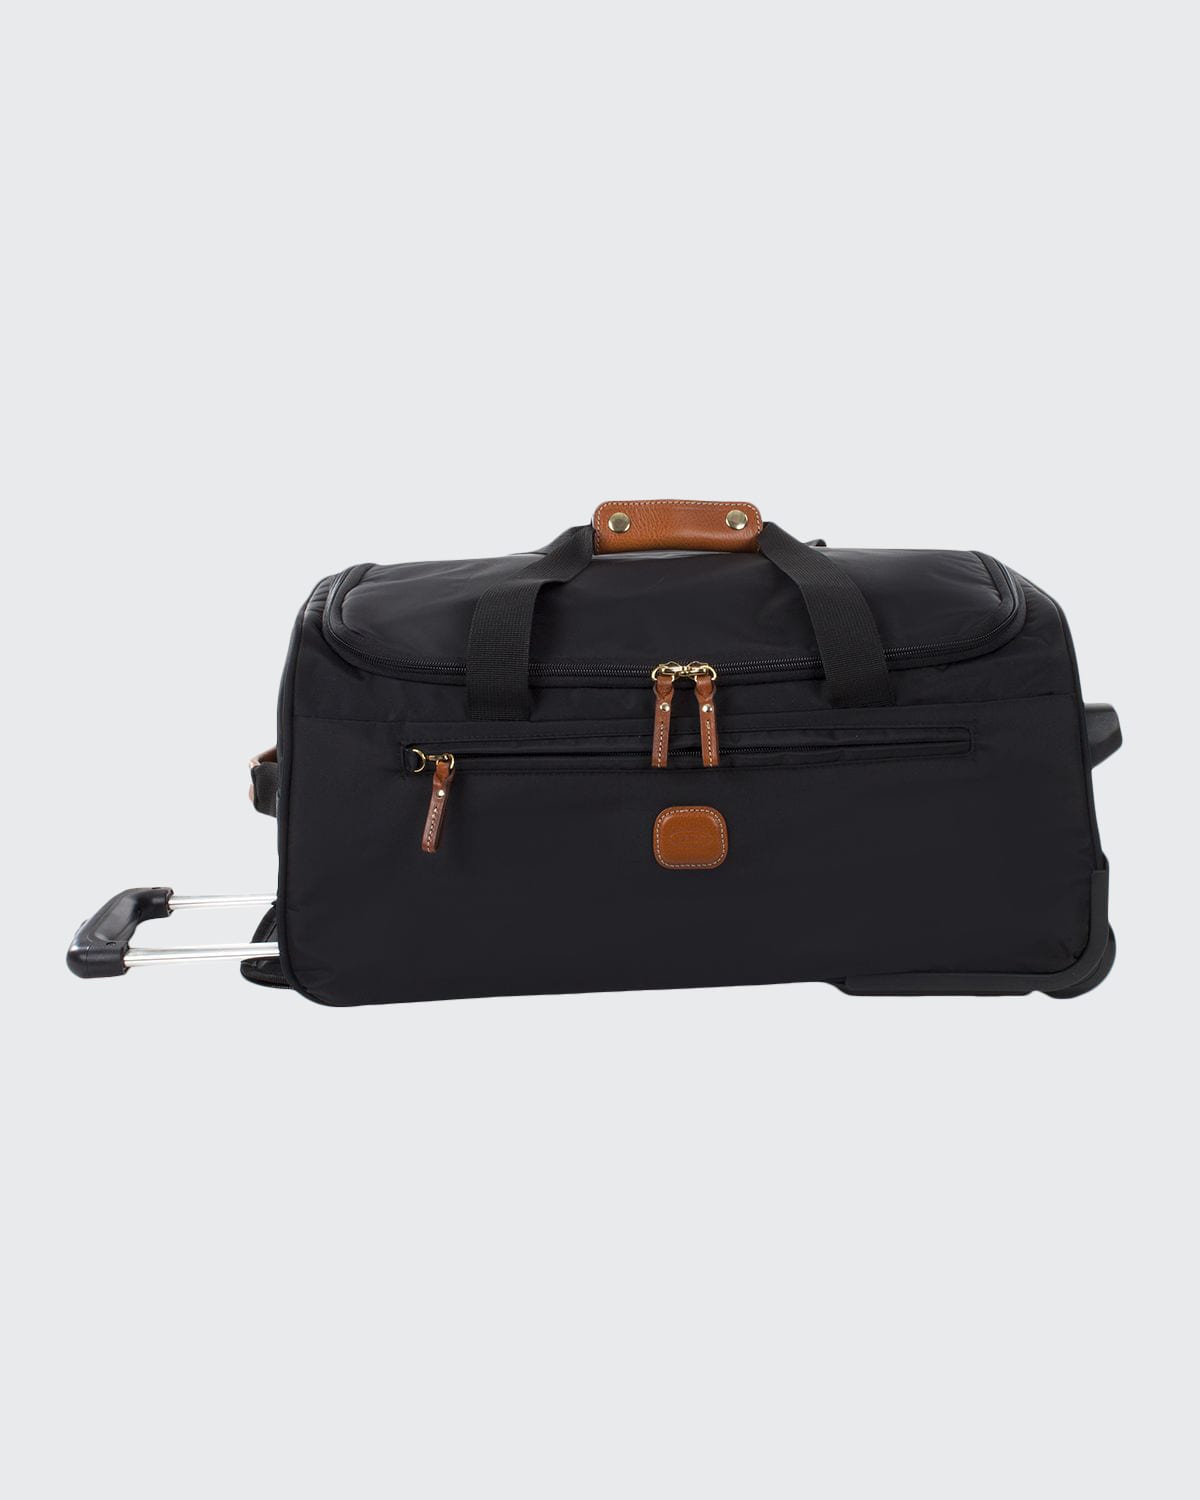 Bric's X-Bag 21" Carry-On Rolling Duffel Luggage